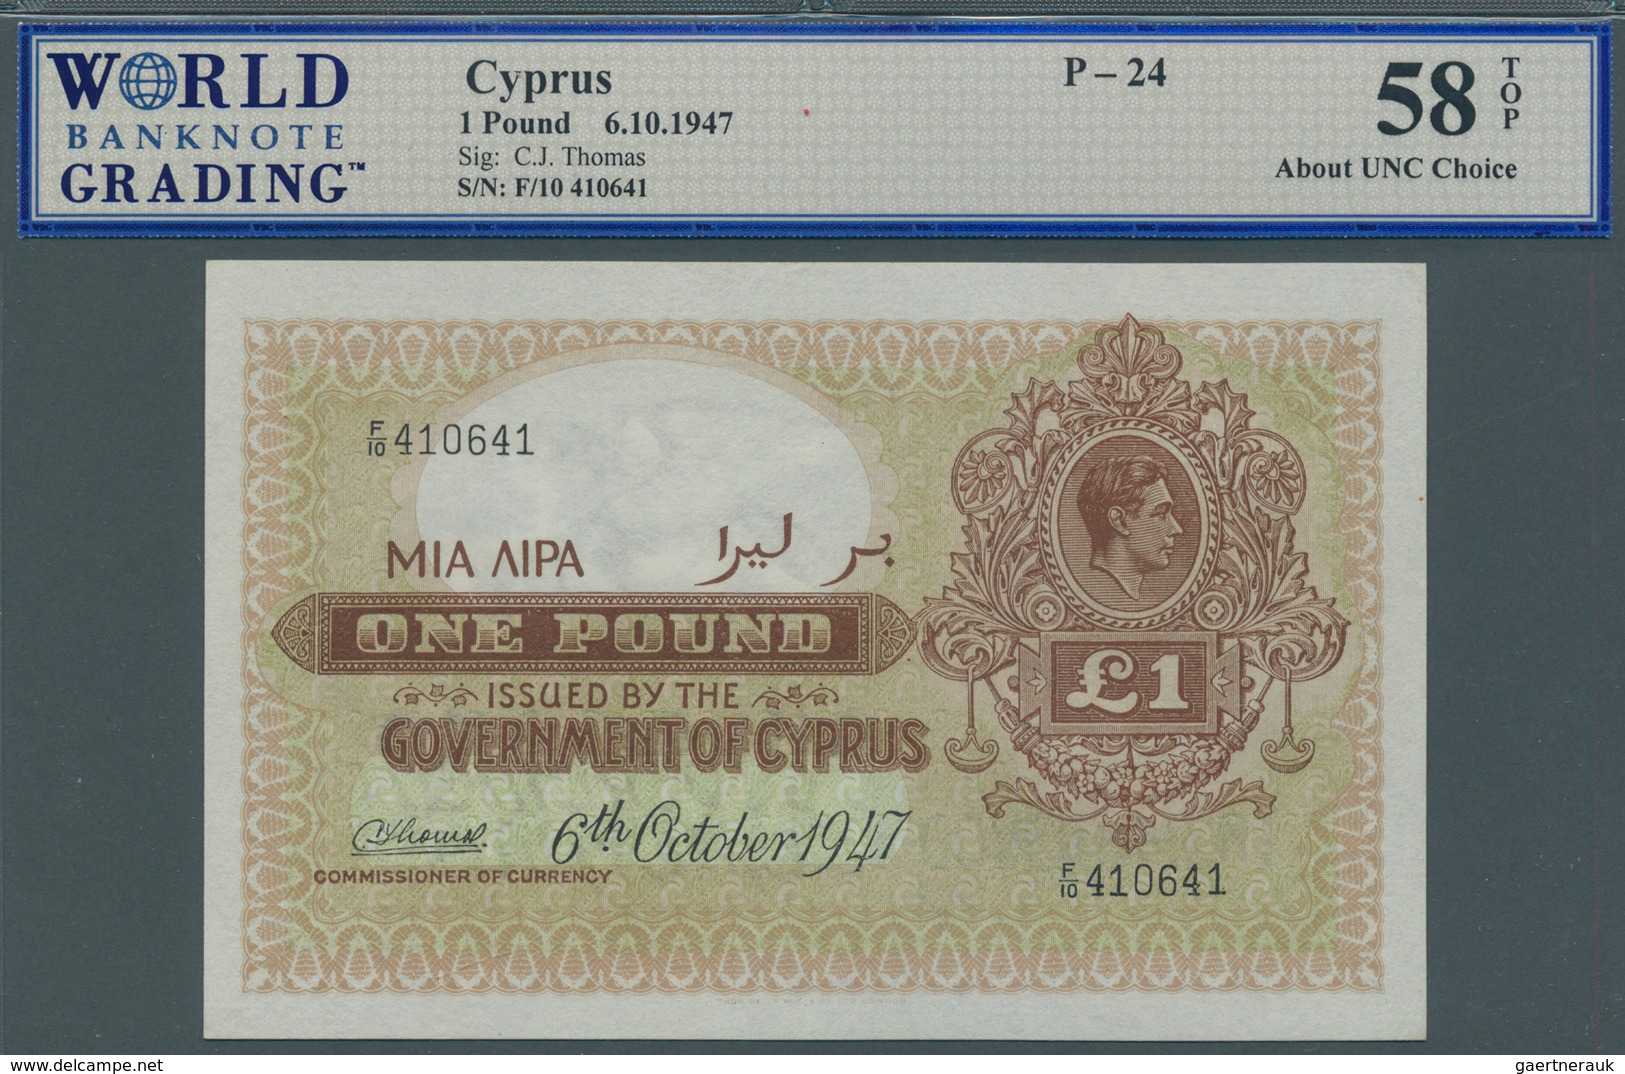 01339 Cyprus / Zypern: 1 Pound 1947, P.24, Minor Spots At Right Border, WBG Grading 58 About UNC Choice TO - Cyprus